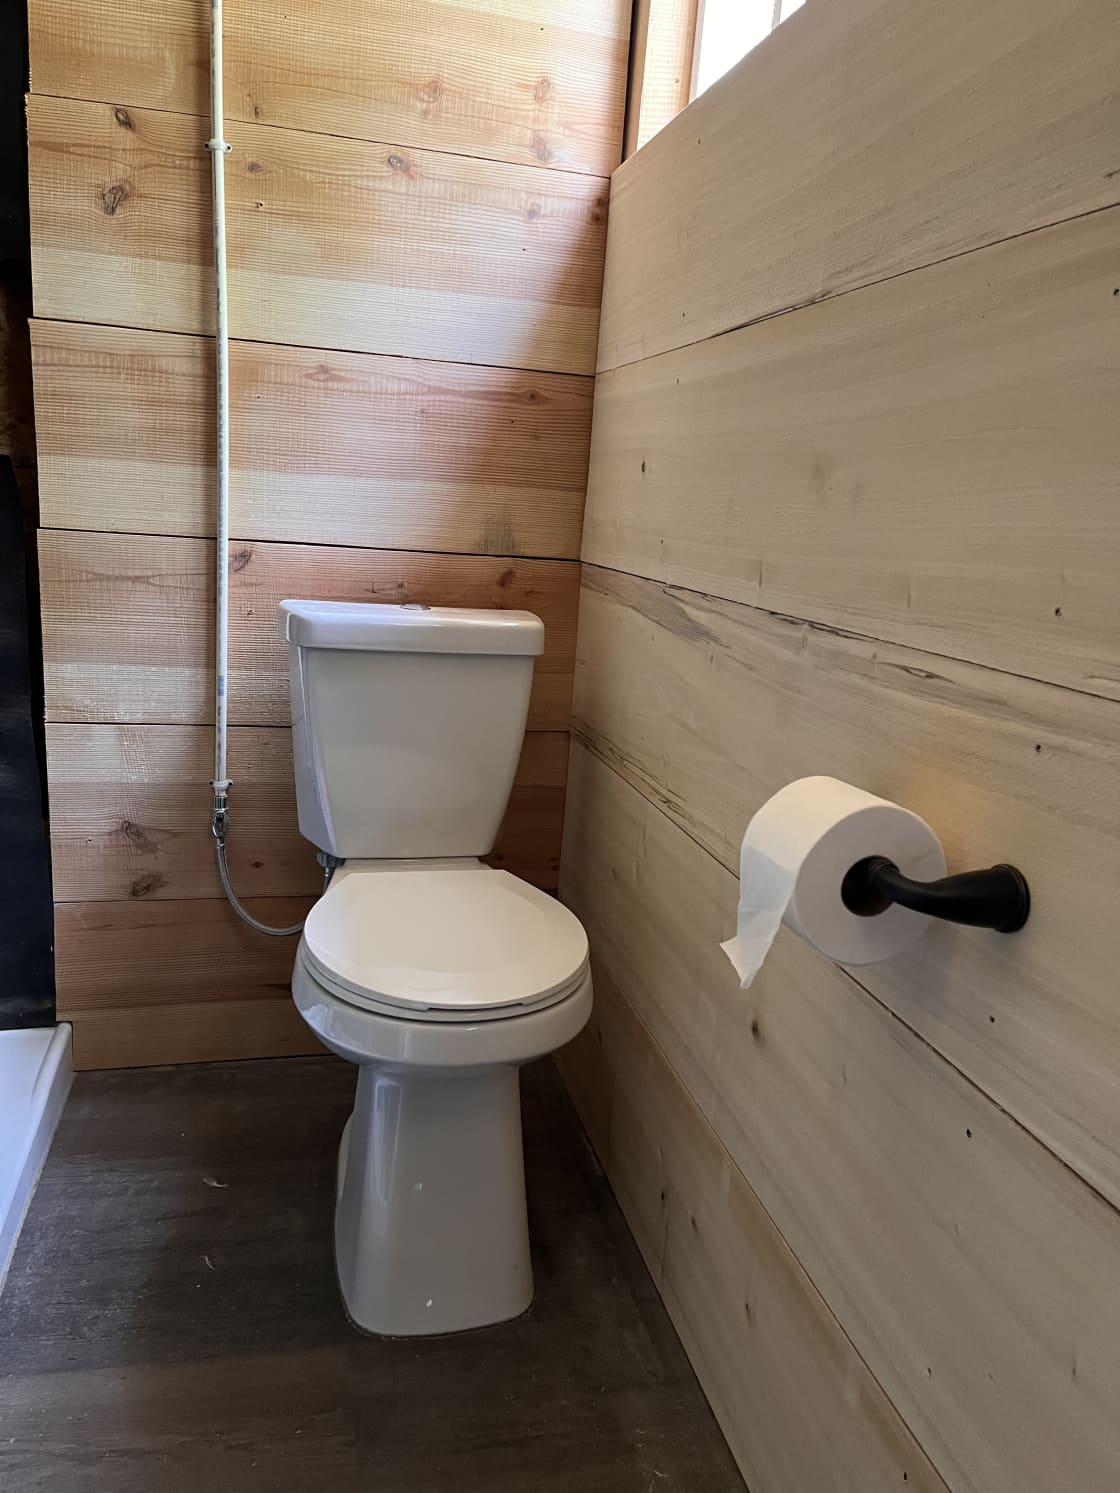 Yeah, that’s a real flush toilet no composting